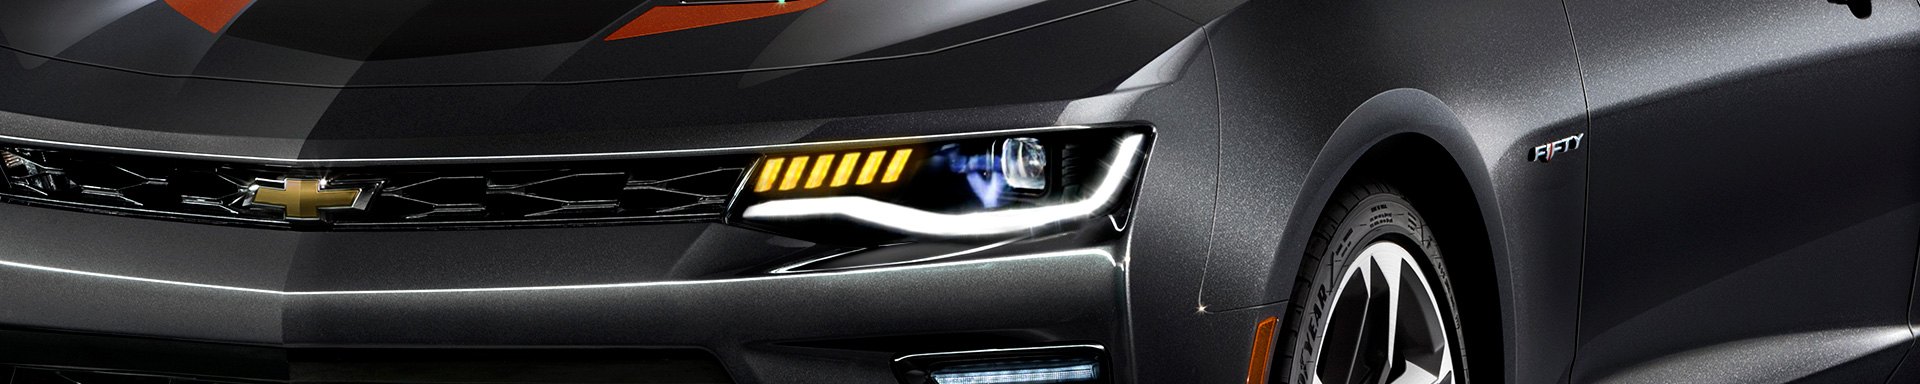 New Style LED DRL Bar Projector Headlights by Spyder For 6th Gen. Camaro